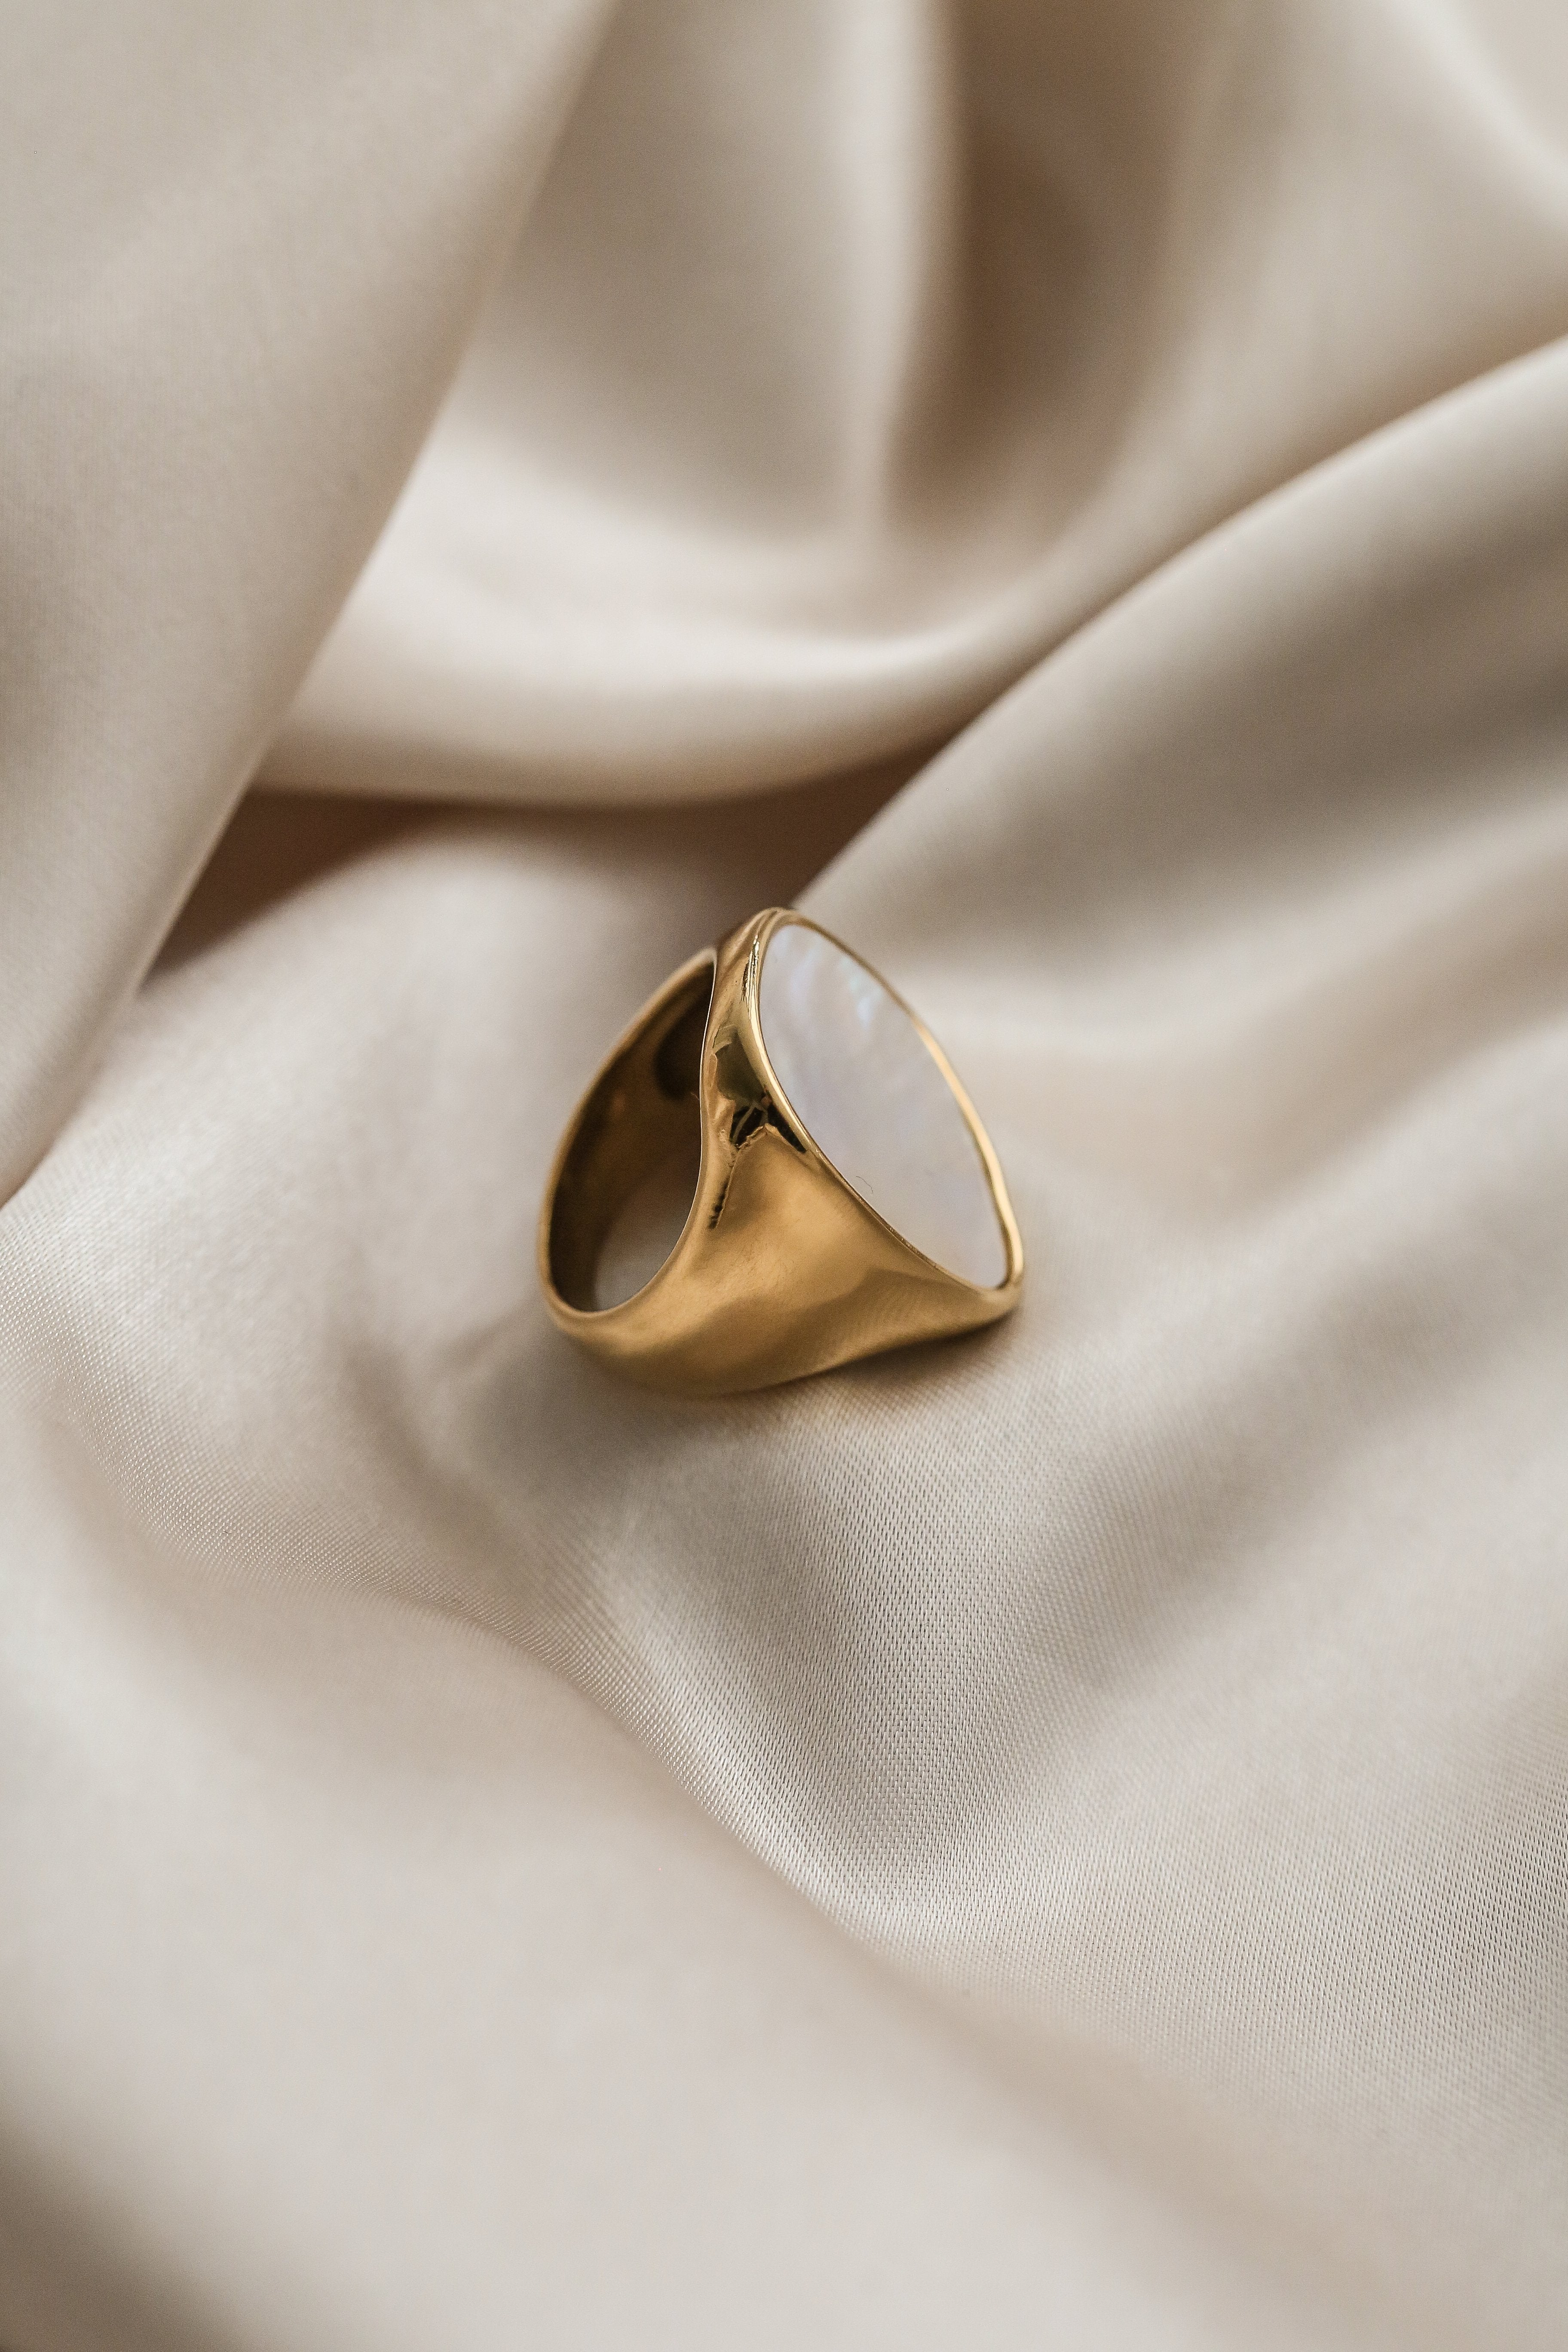 Cassandra Ring - Boutique Minimaliste has waterproof, durable, elegant and vintage inspired jewelry